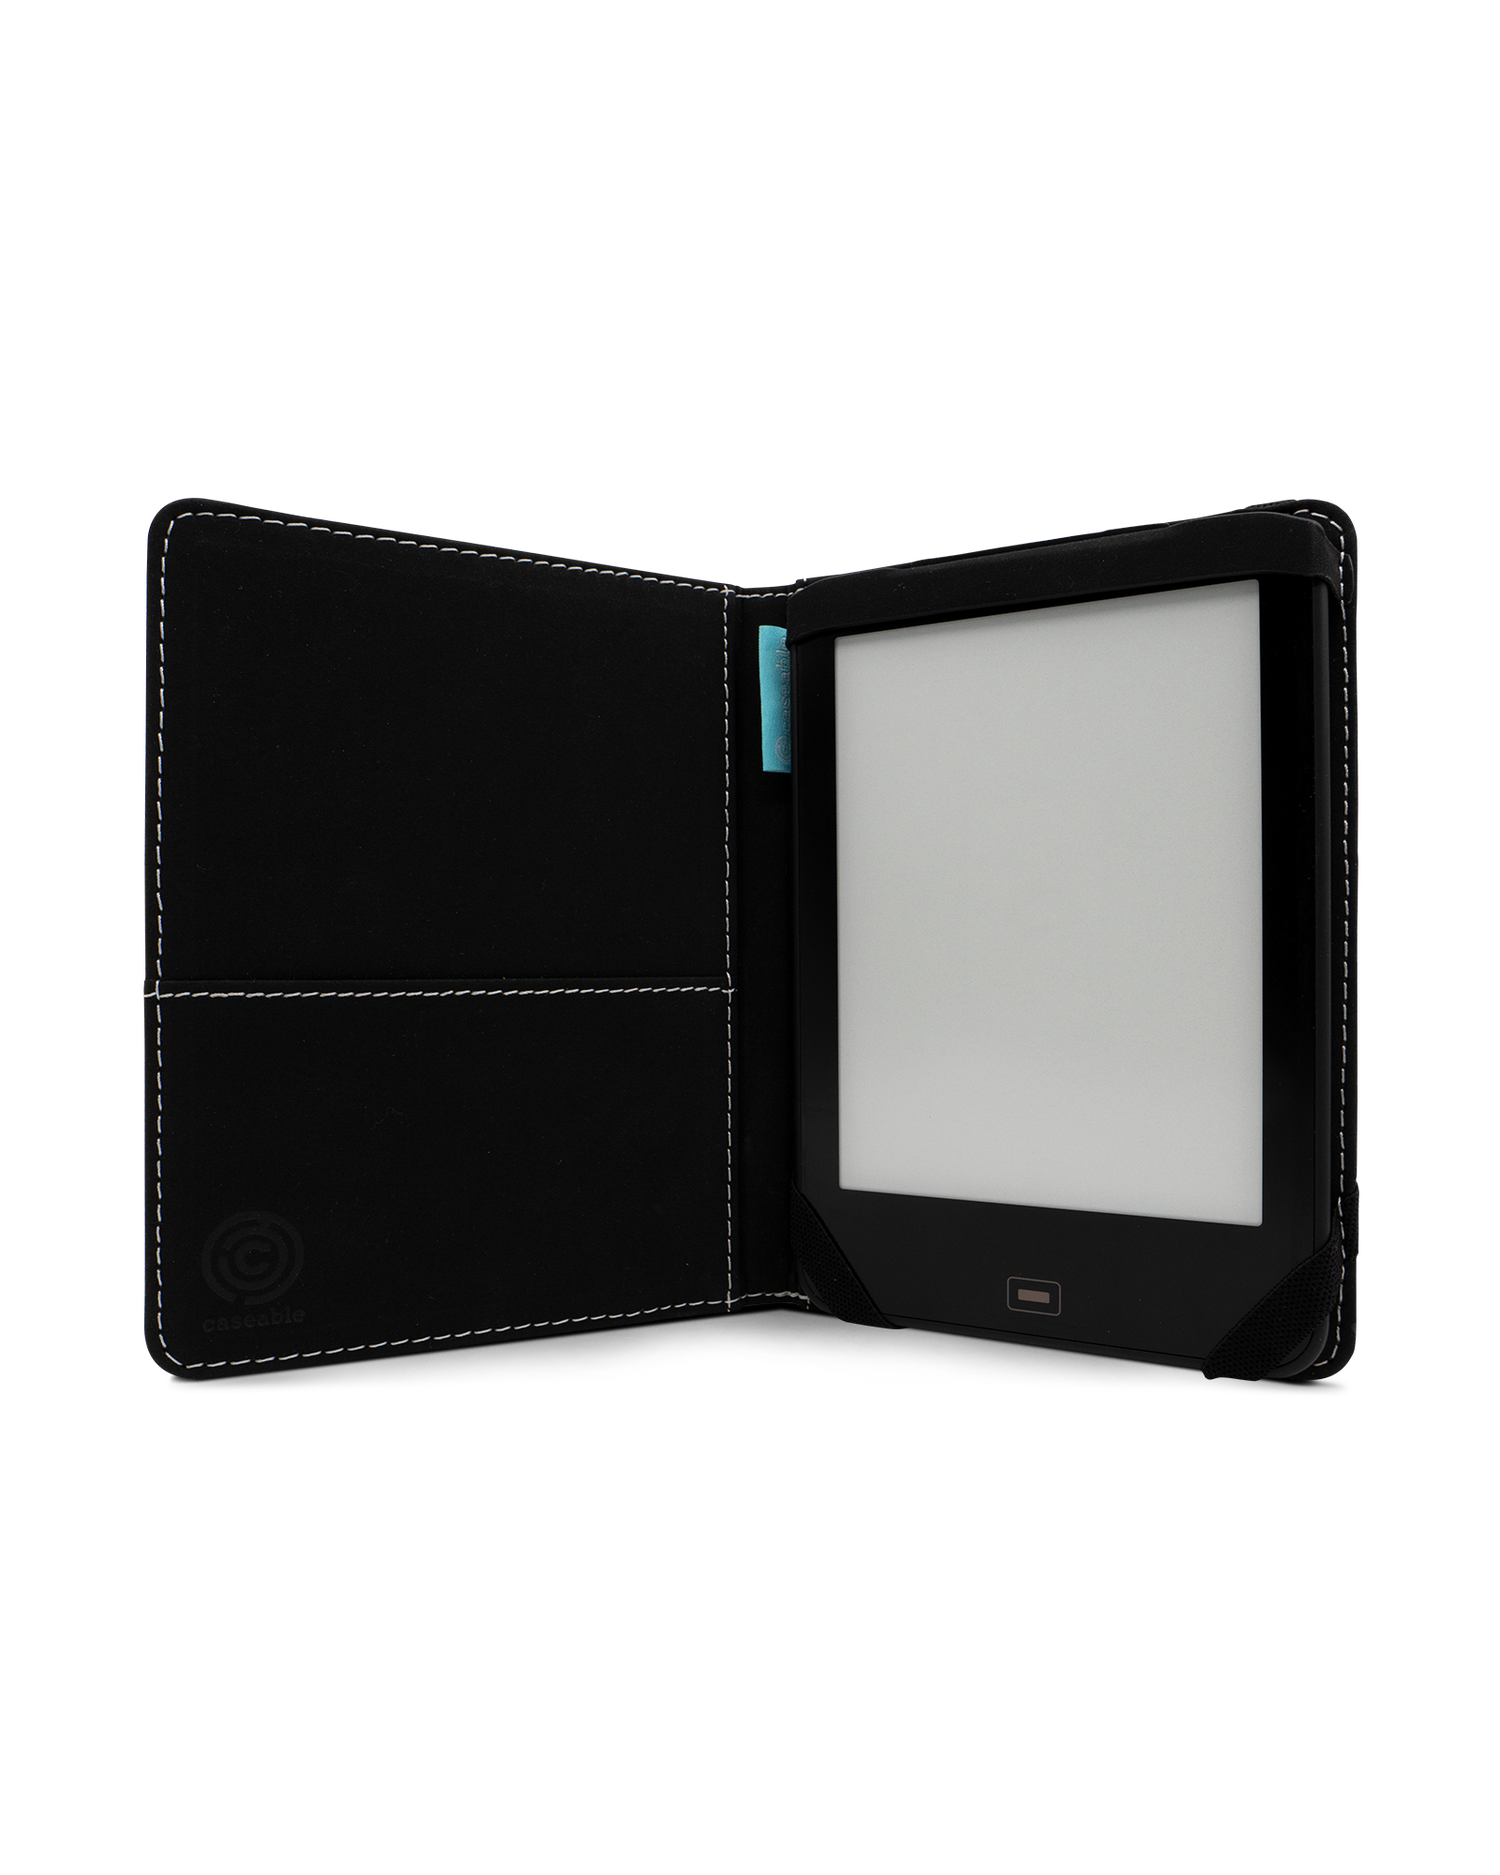 VRC eReader Case for tolino vision 1 to 4 HD: Opened interior view